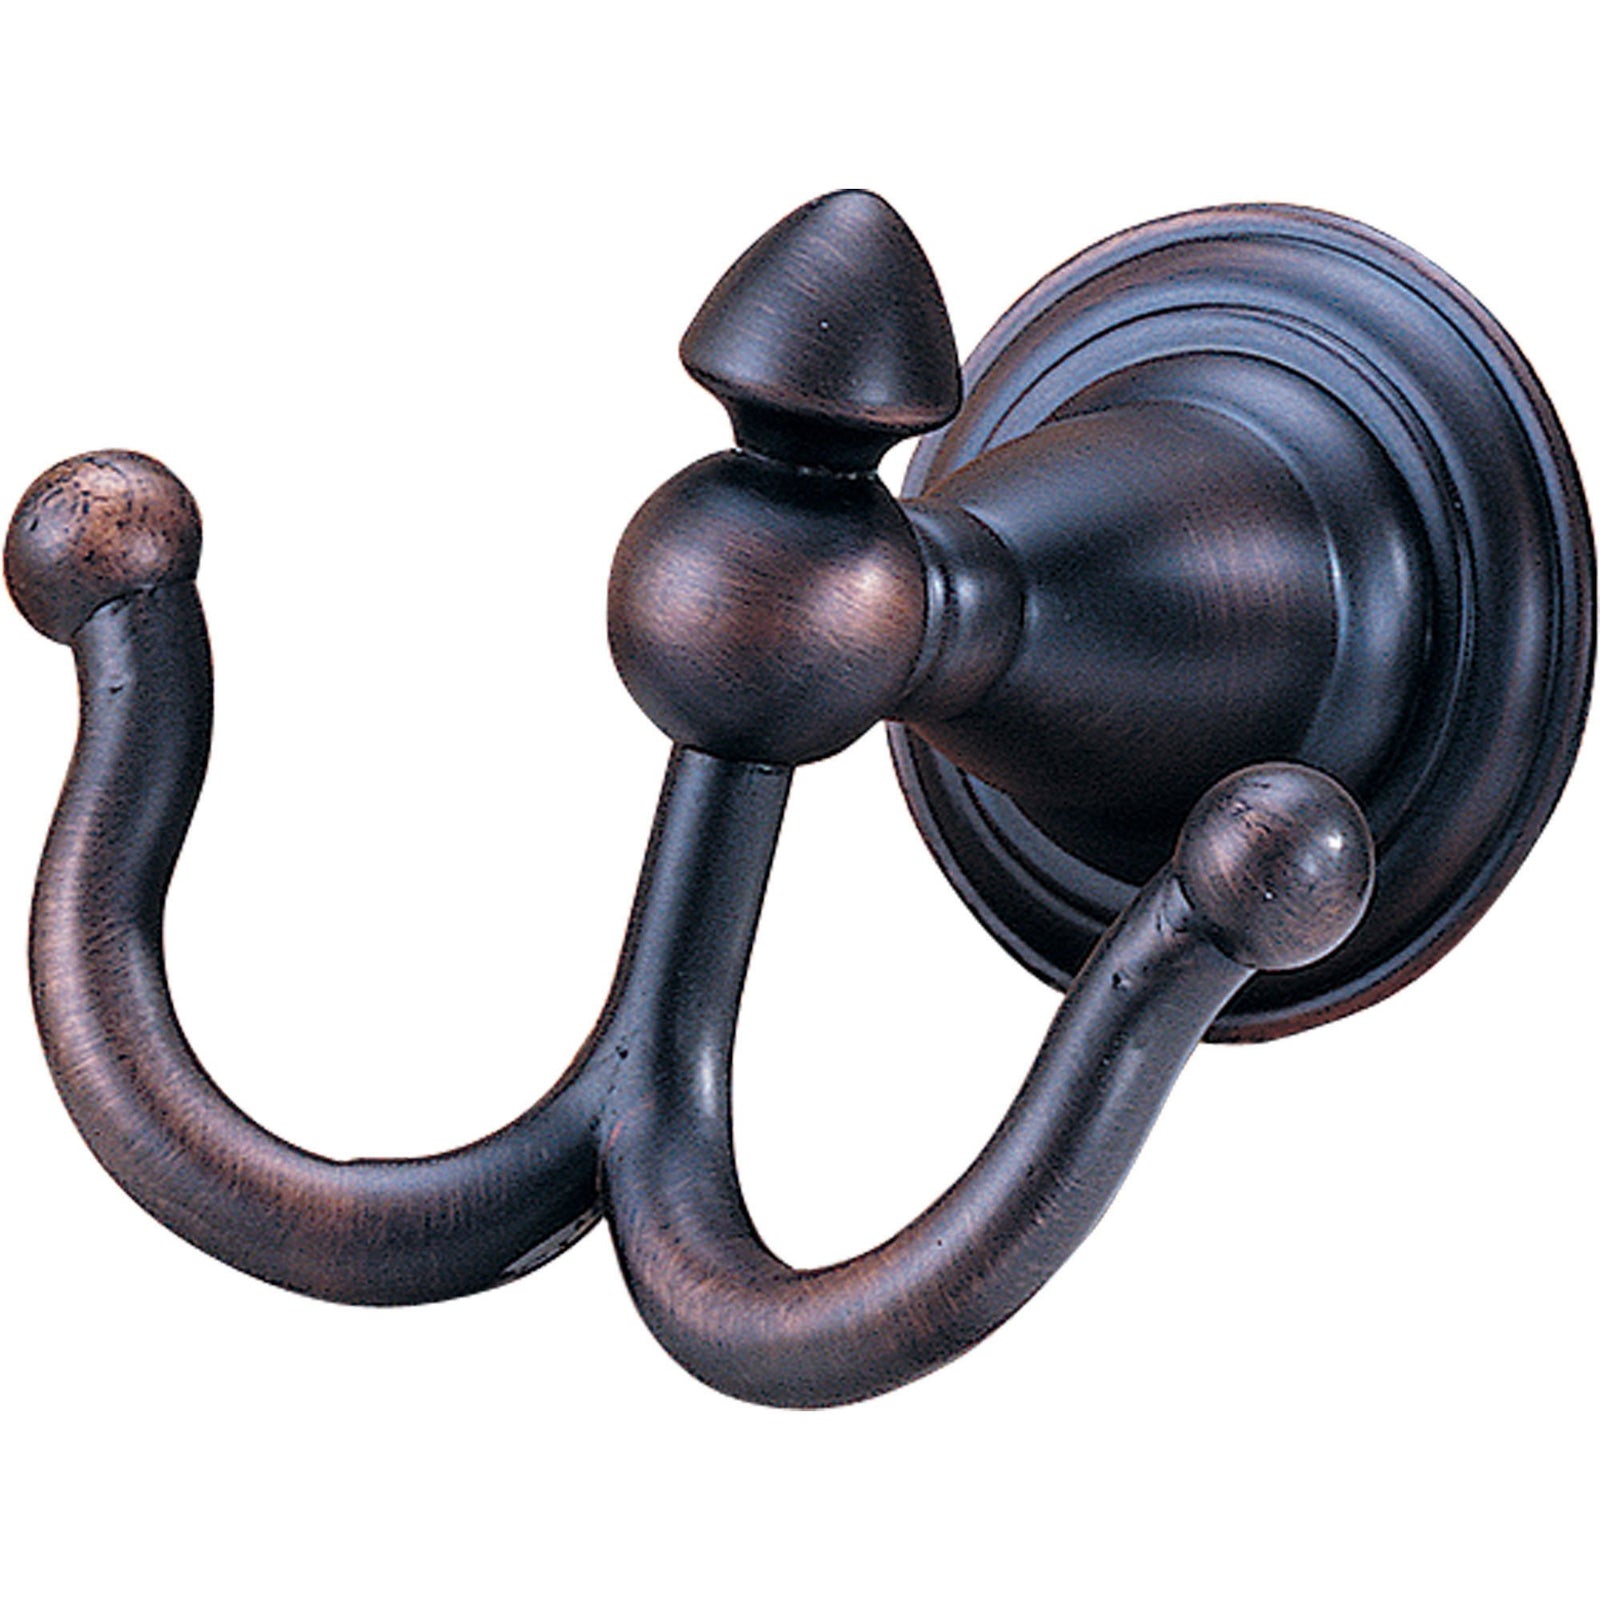 Robe Hooks - Get a Decorative Robe or Towel Hook for you Bathroom Tagged  danze 